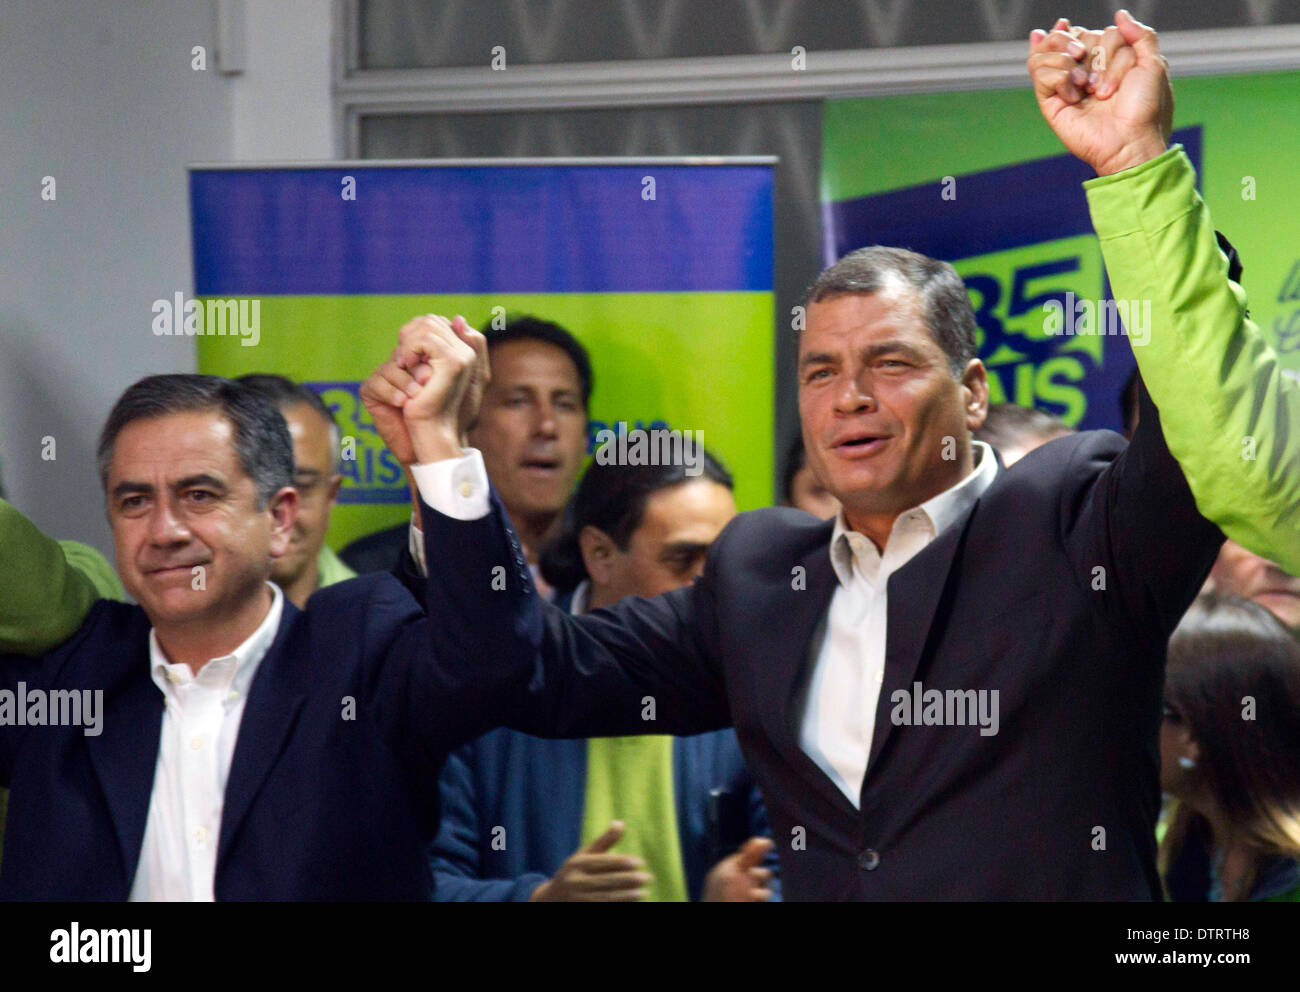 Quito, Ecuador. 23rd Feb, 2014. Ecuador's President Rafael Correa (R) and the candidate for the reelection to the Quito's Mayoralty, Augusto Barrera (L), react after receiving the results of the provincial and municipal election, at the headquarters of the Pais Alliance party, in the city of Quito, capital of Ecuador, on Feb. 23, 2014. The opposition candidate Mauricio Rodas won the election for the Quito's Mayoralty, according to local press. Credit:  Santiago Armas/Xinhua/Alamy Live News Stock Photo